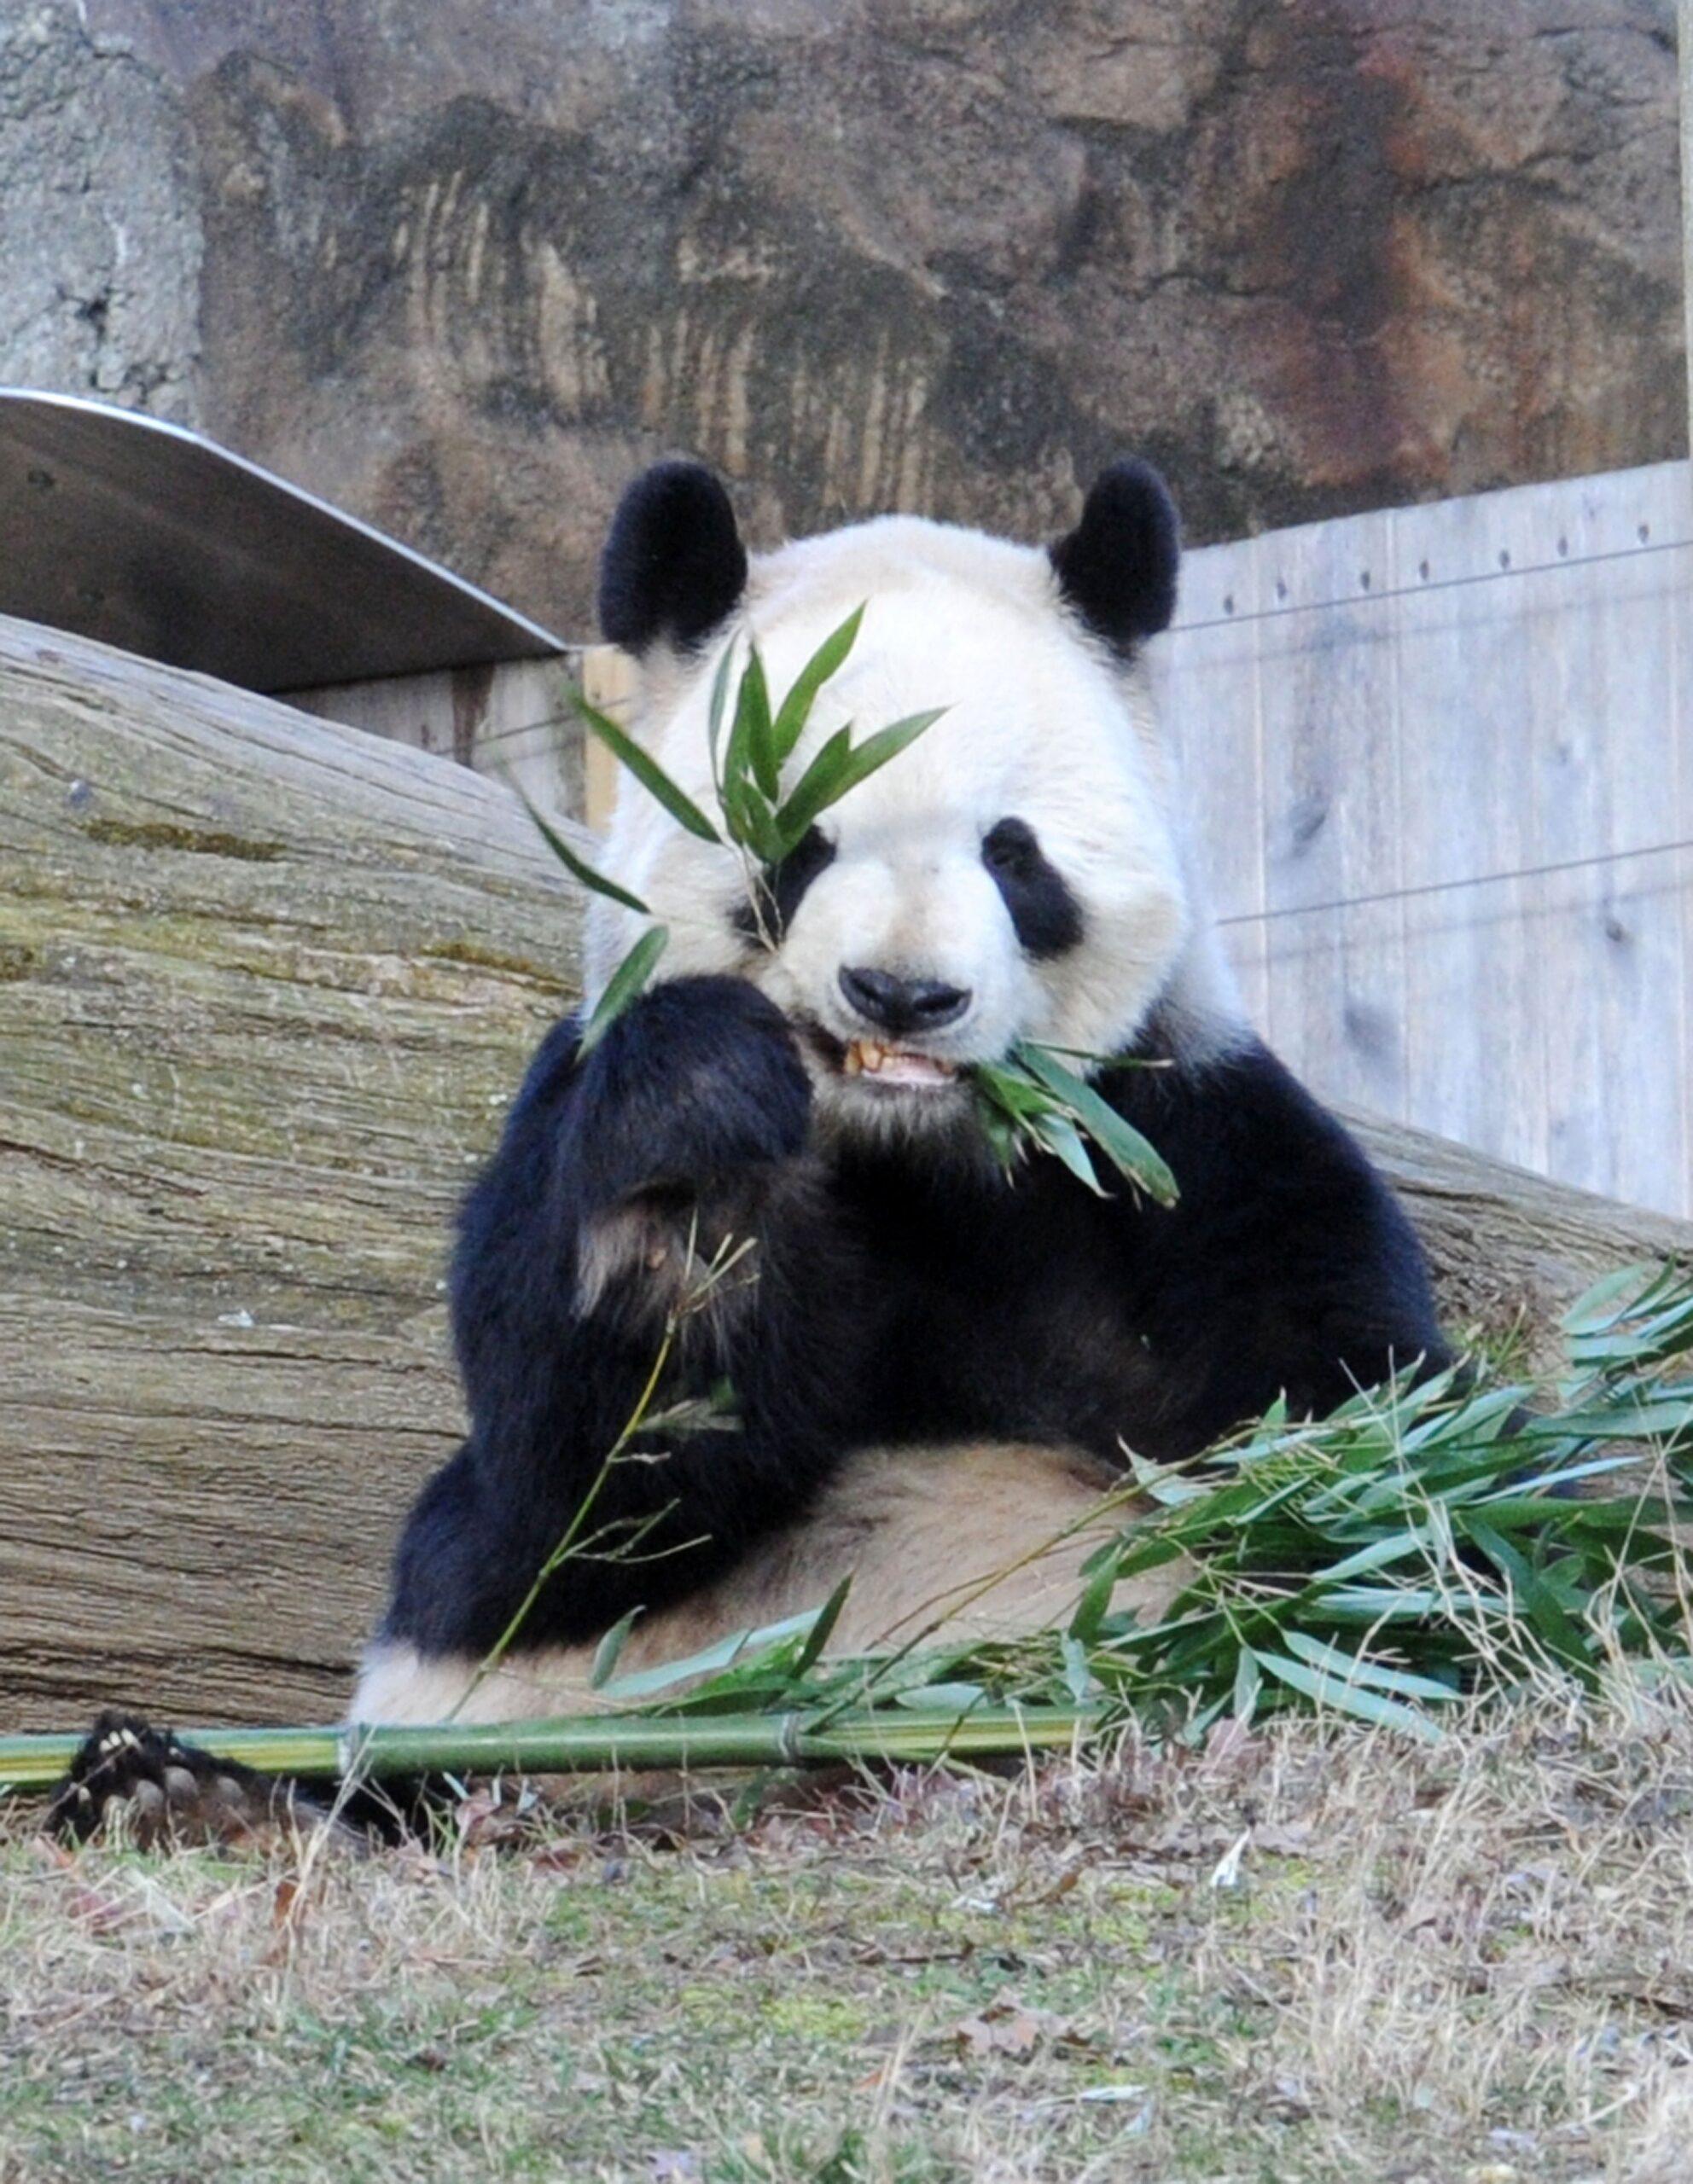 D.C. National Zoo Has ZERO Pandas For The First Time Since 2000 As Bears Depart For China